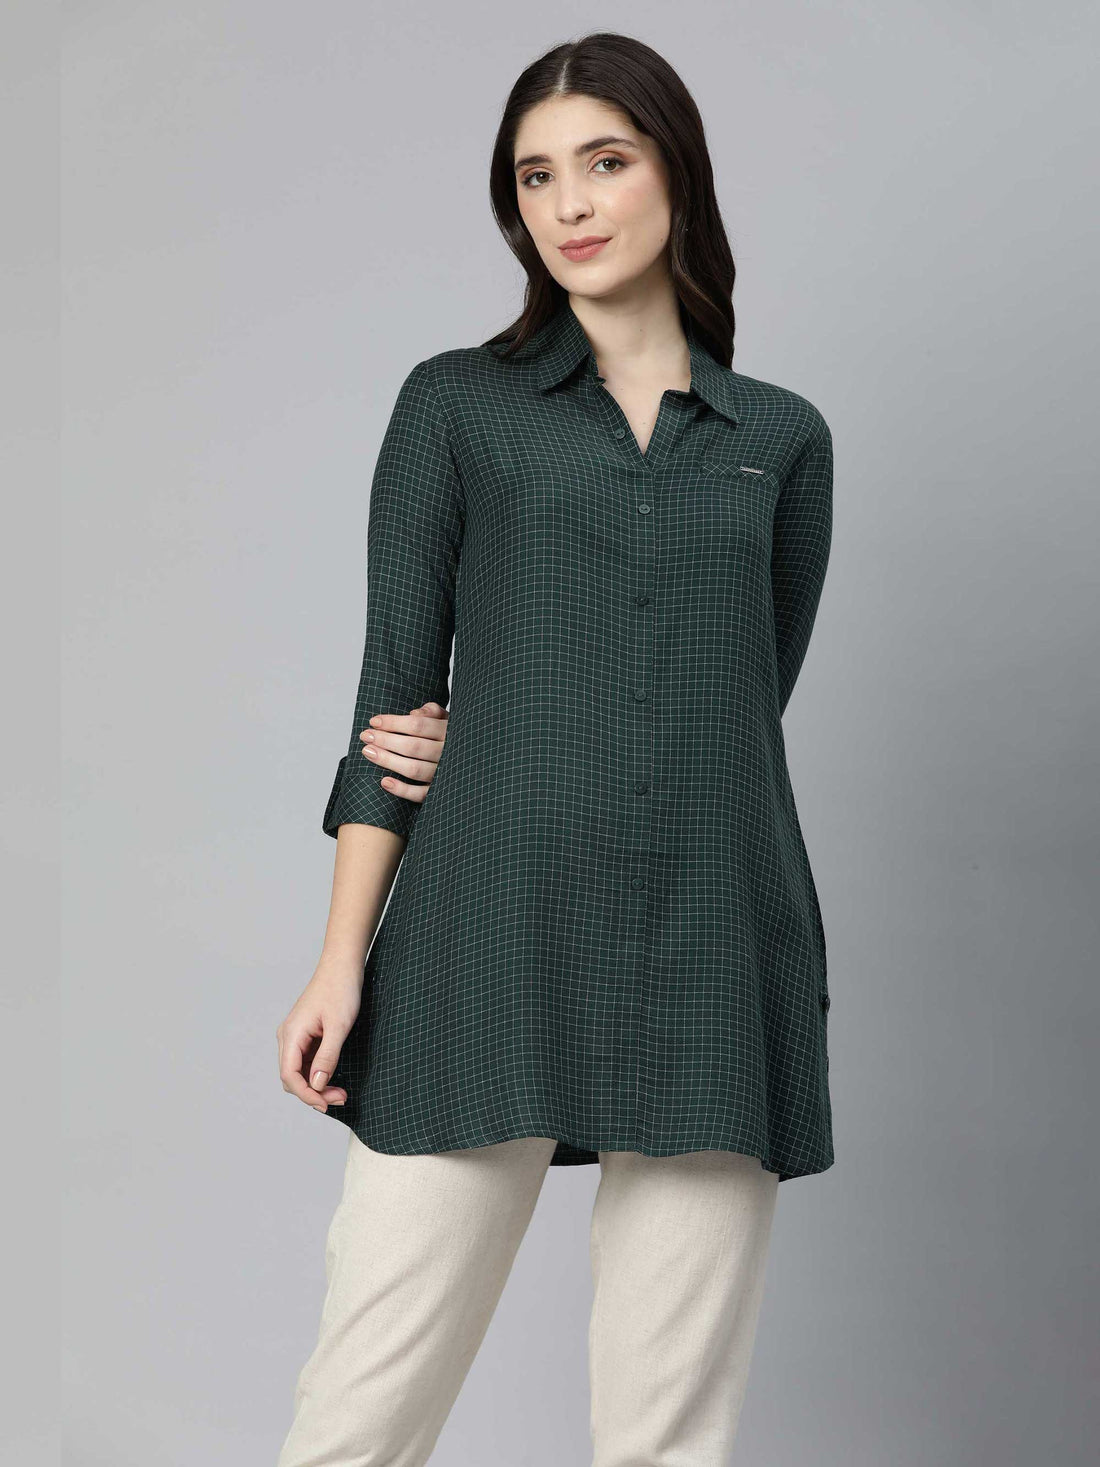 Yarn Dyed Chequered Top - Etiquette Apparel